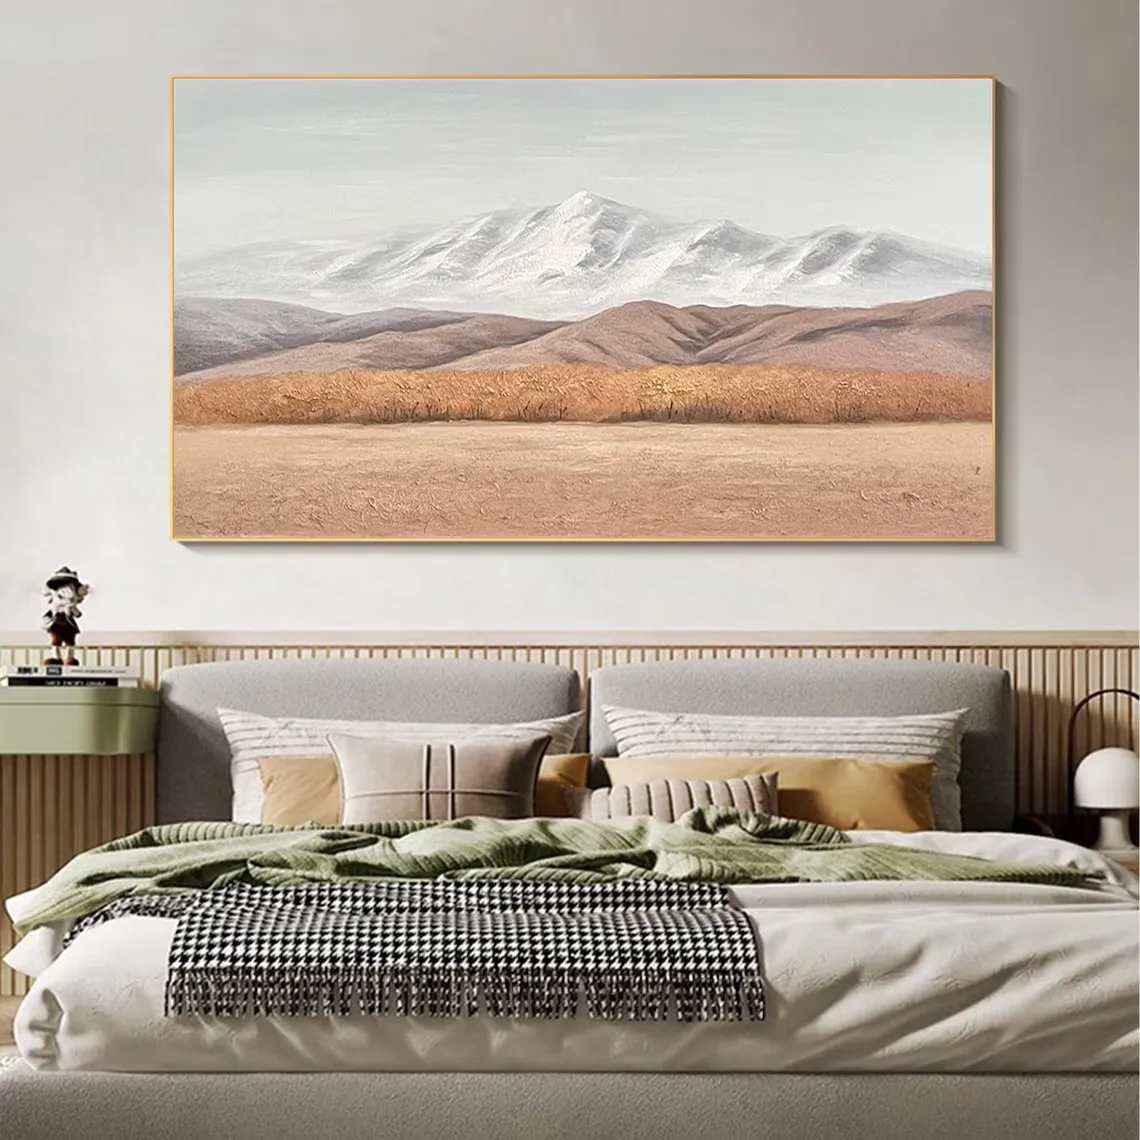 Landscape Oil Painting on Canvas,Large Mountain Wall Art for Study Room,Office,Handmade Painting Picture for Living Room Decor